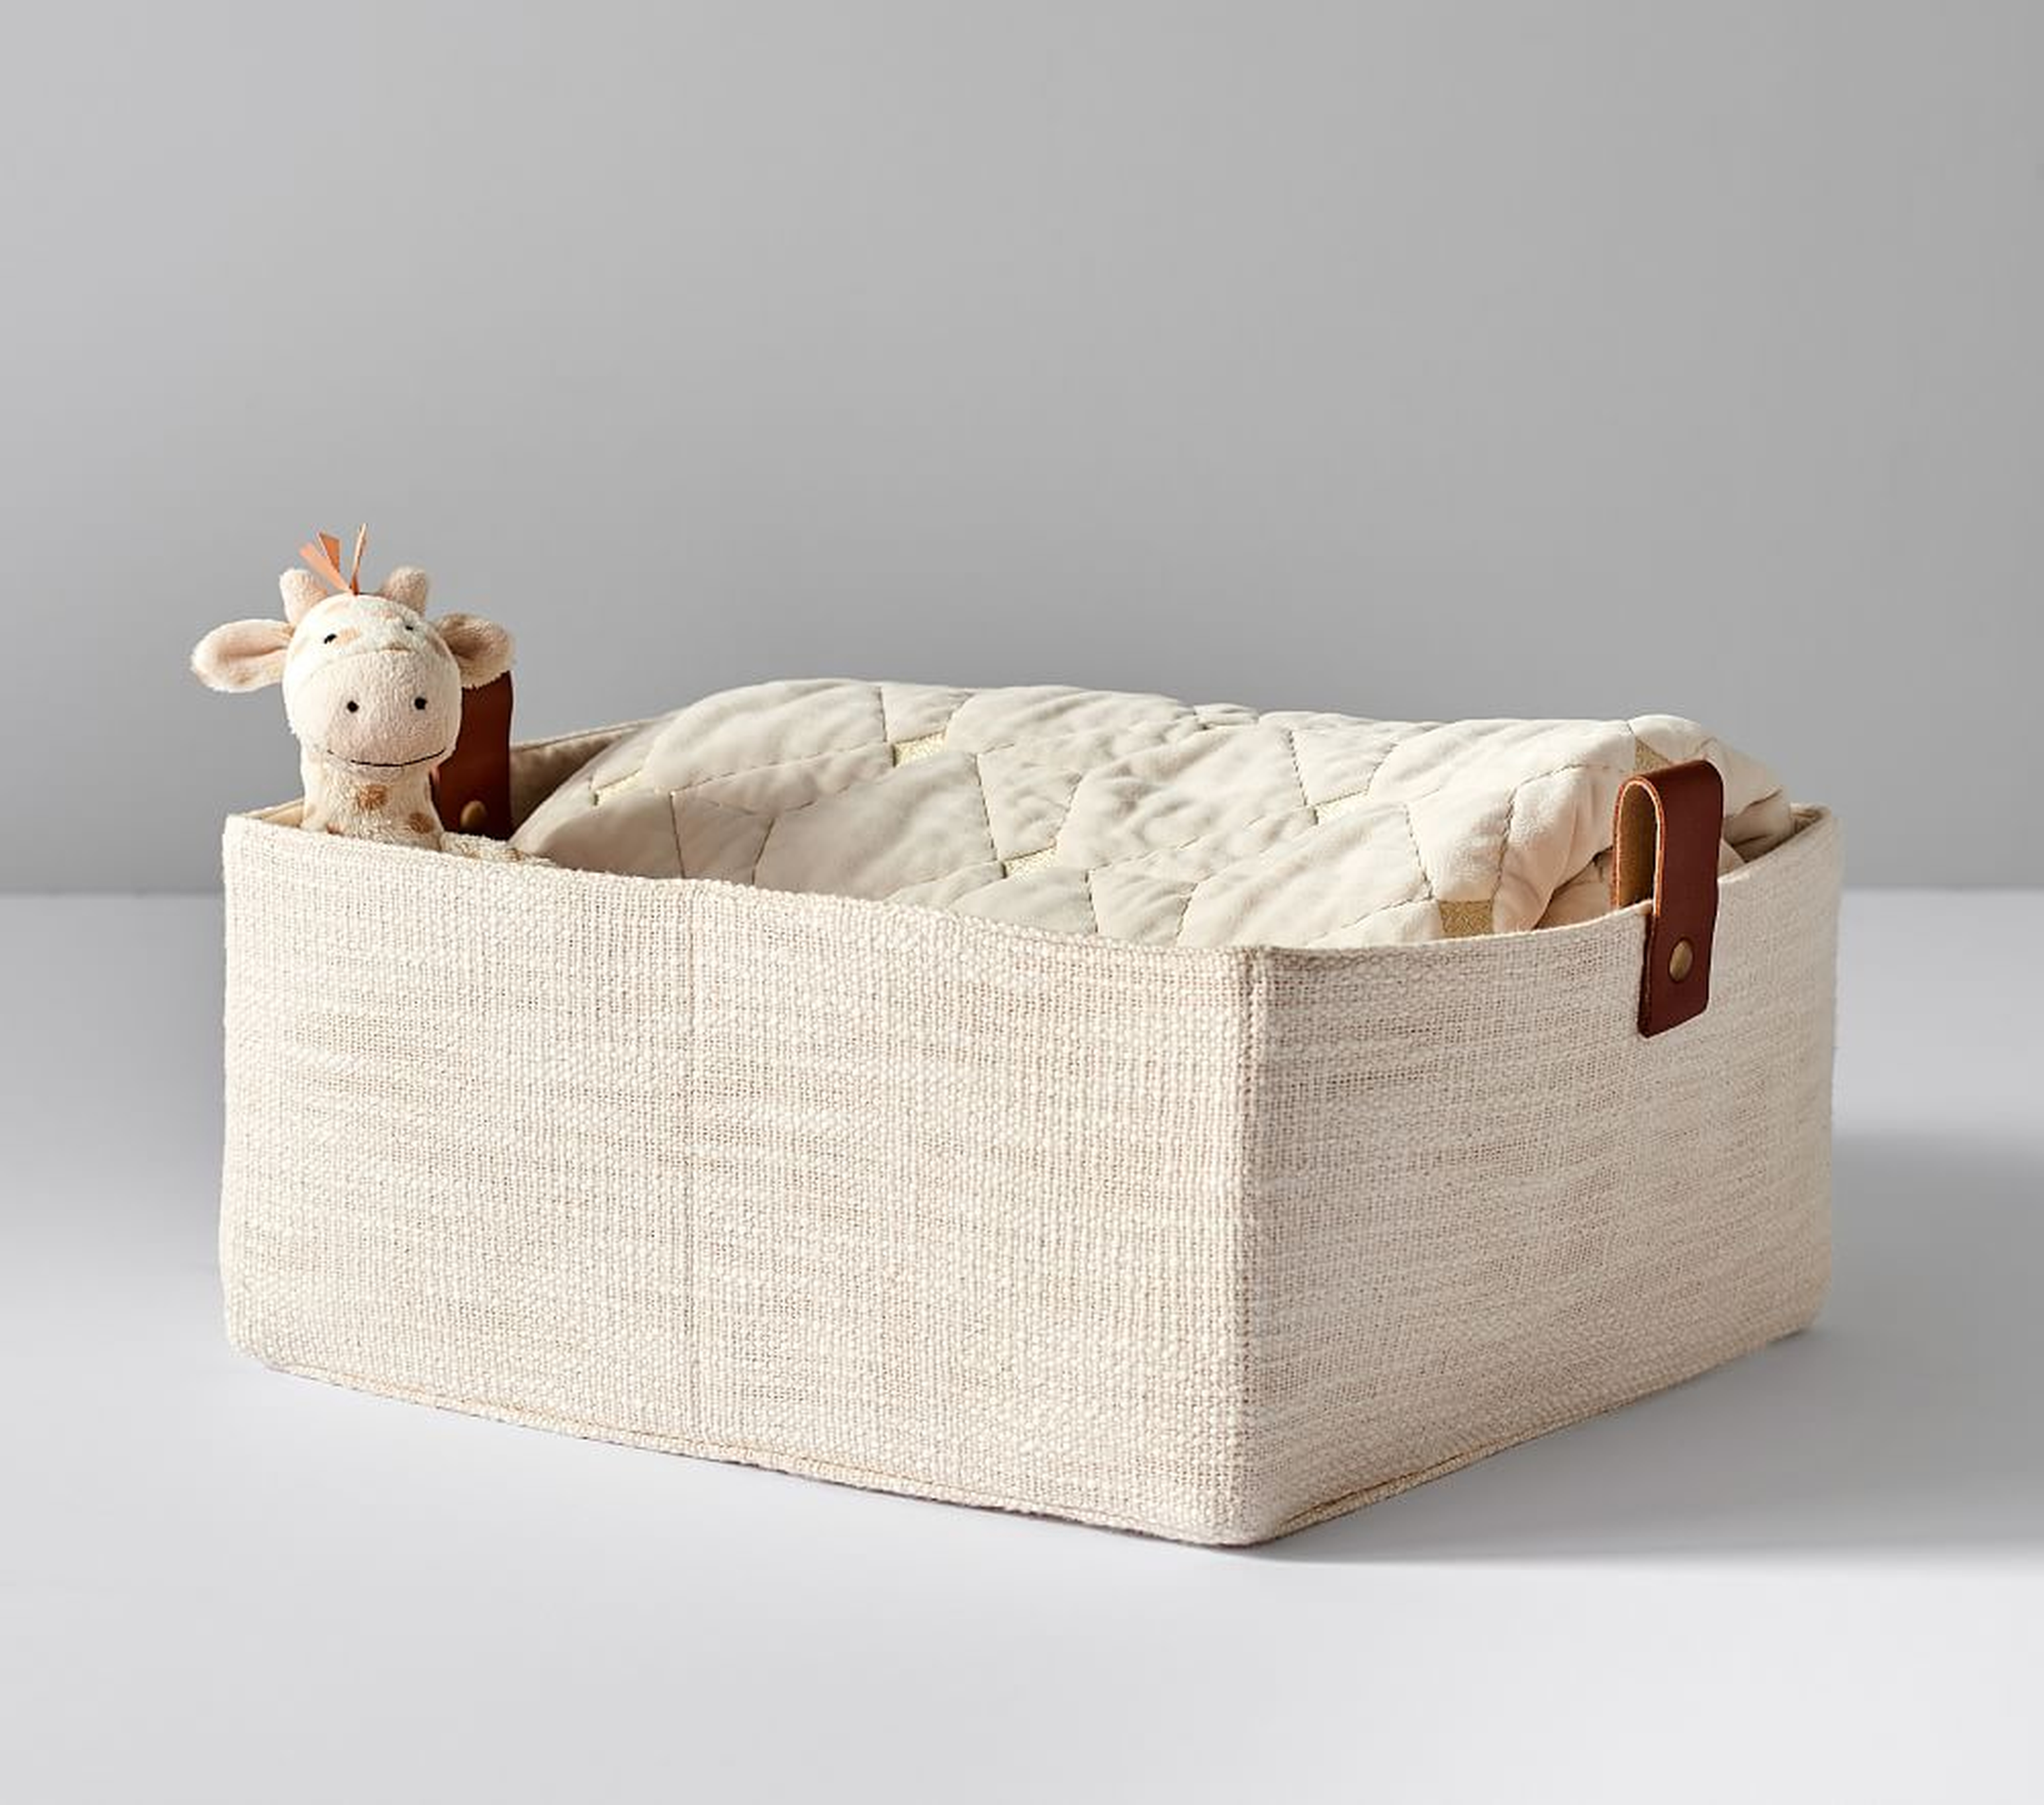 Linen and Leather Storage, Large - Pottery Barn Kids